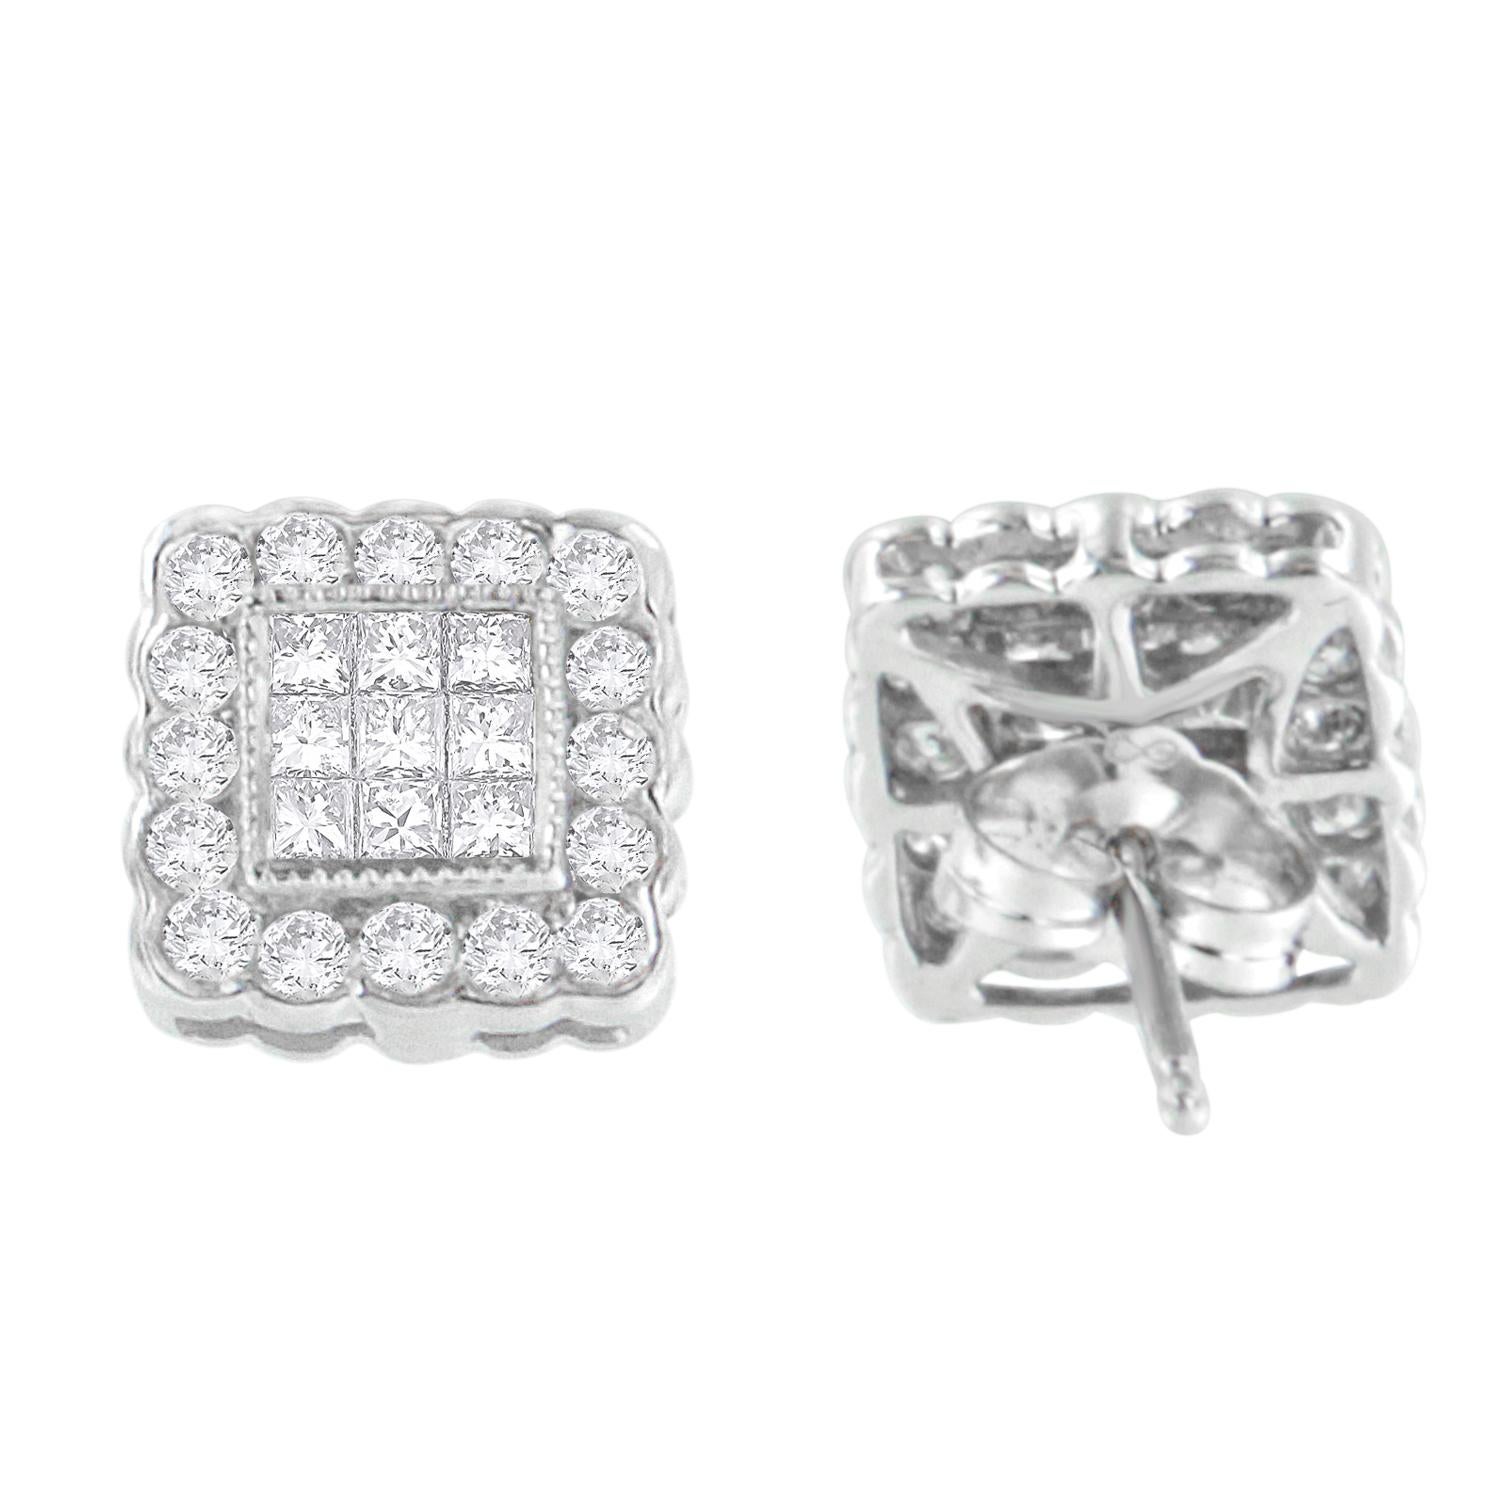 Beautifully crafted of high-quality 14-karat white gold, these stunning square shaped stud earrings hold 1.1 carat of dazzling, round and princess cut diamonds. Polished to a high shine finish, these earrings secure with push-on-screw-off clasp.